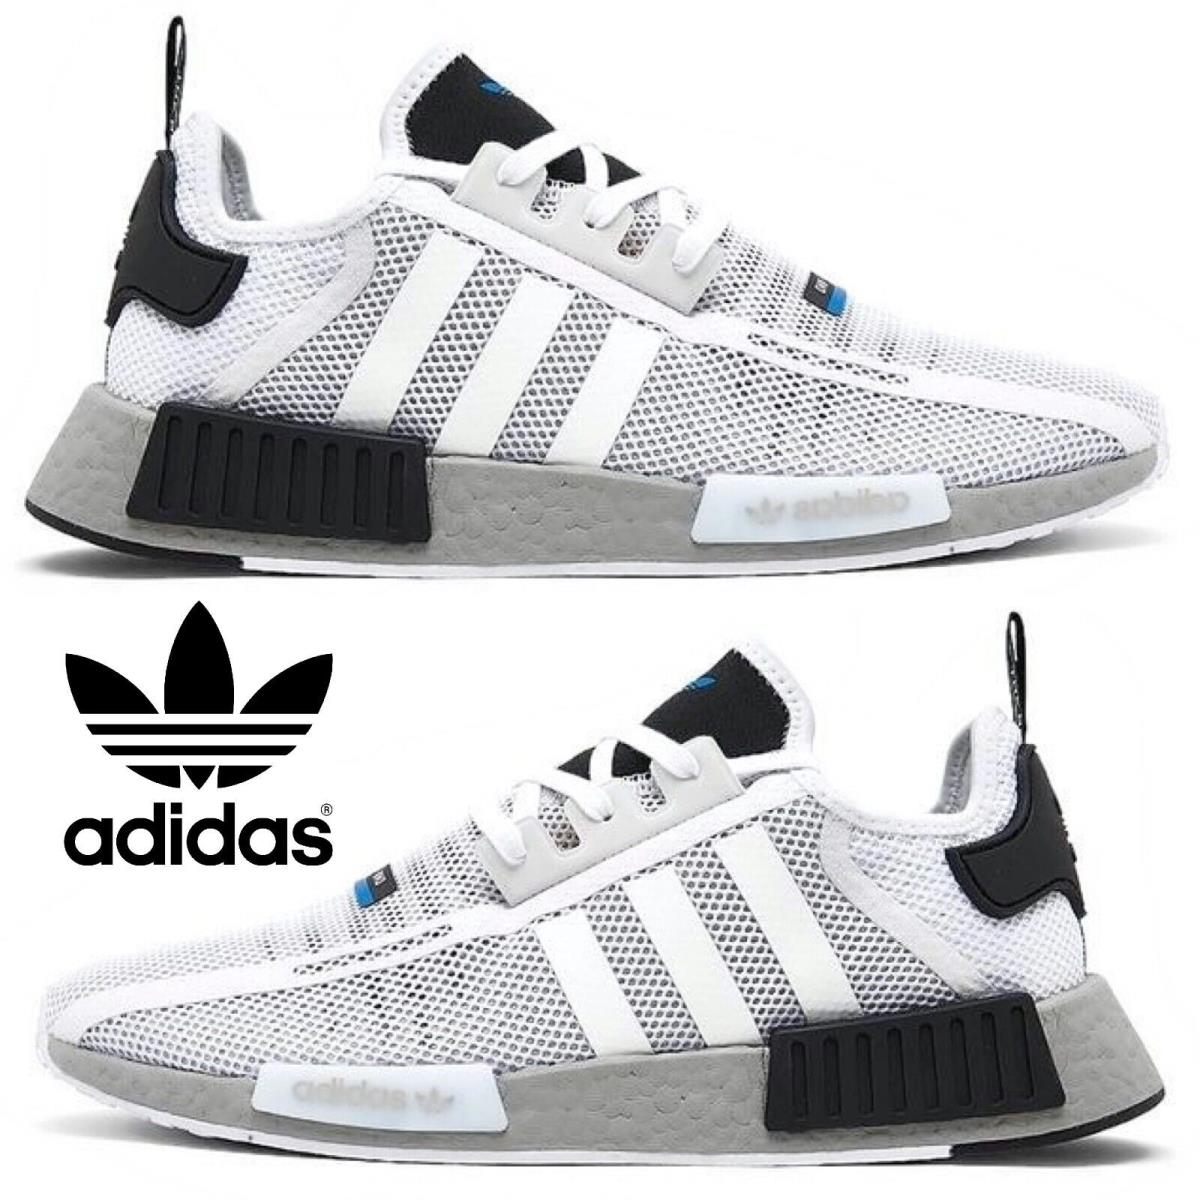 Adidas Originals Nmd R1 Men`s Sneakers Running Shoes Gym Casual Sport White Gray - White, Manufacturer: Footwear White/Grey/Grey/Multi